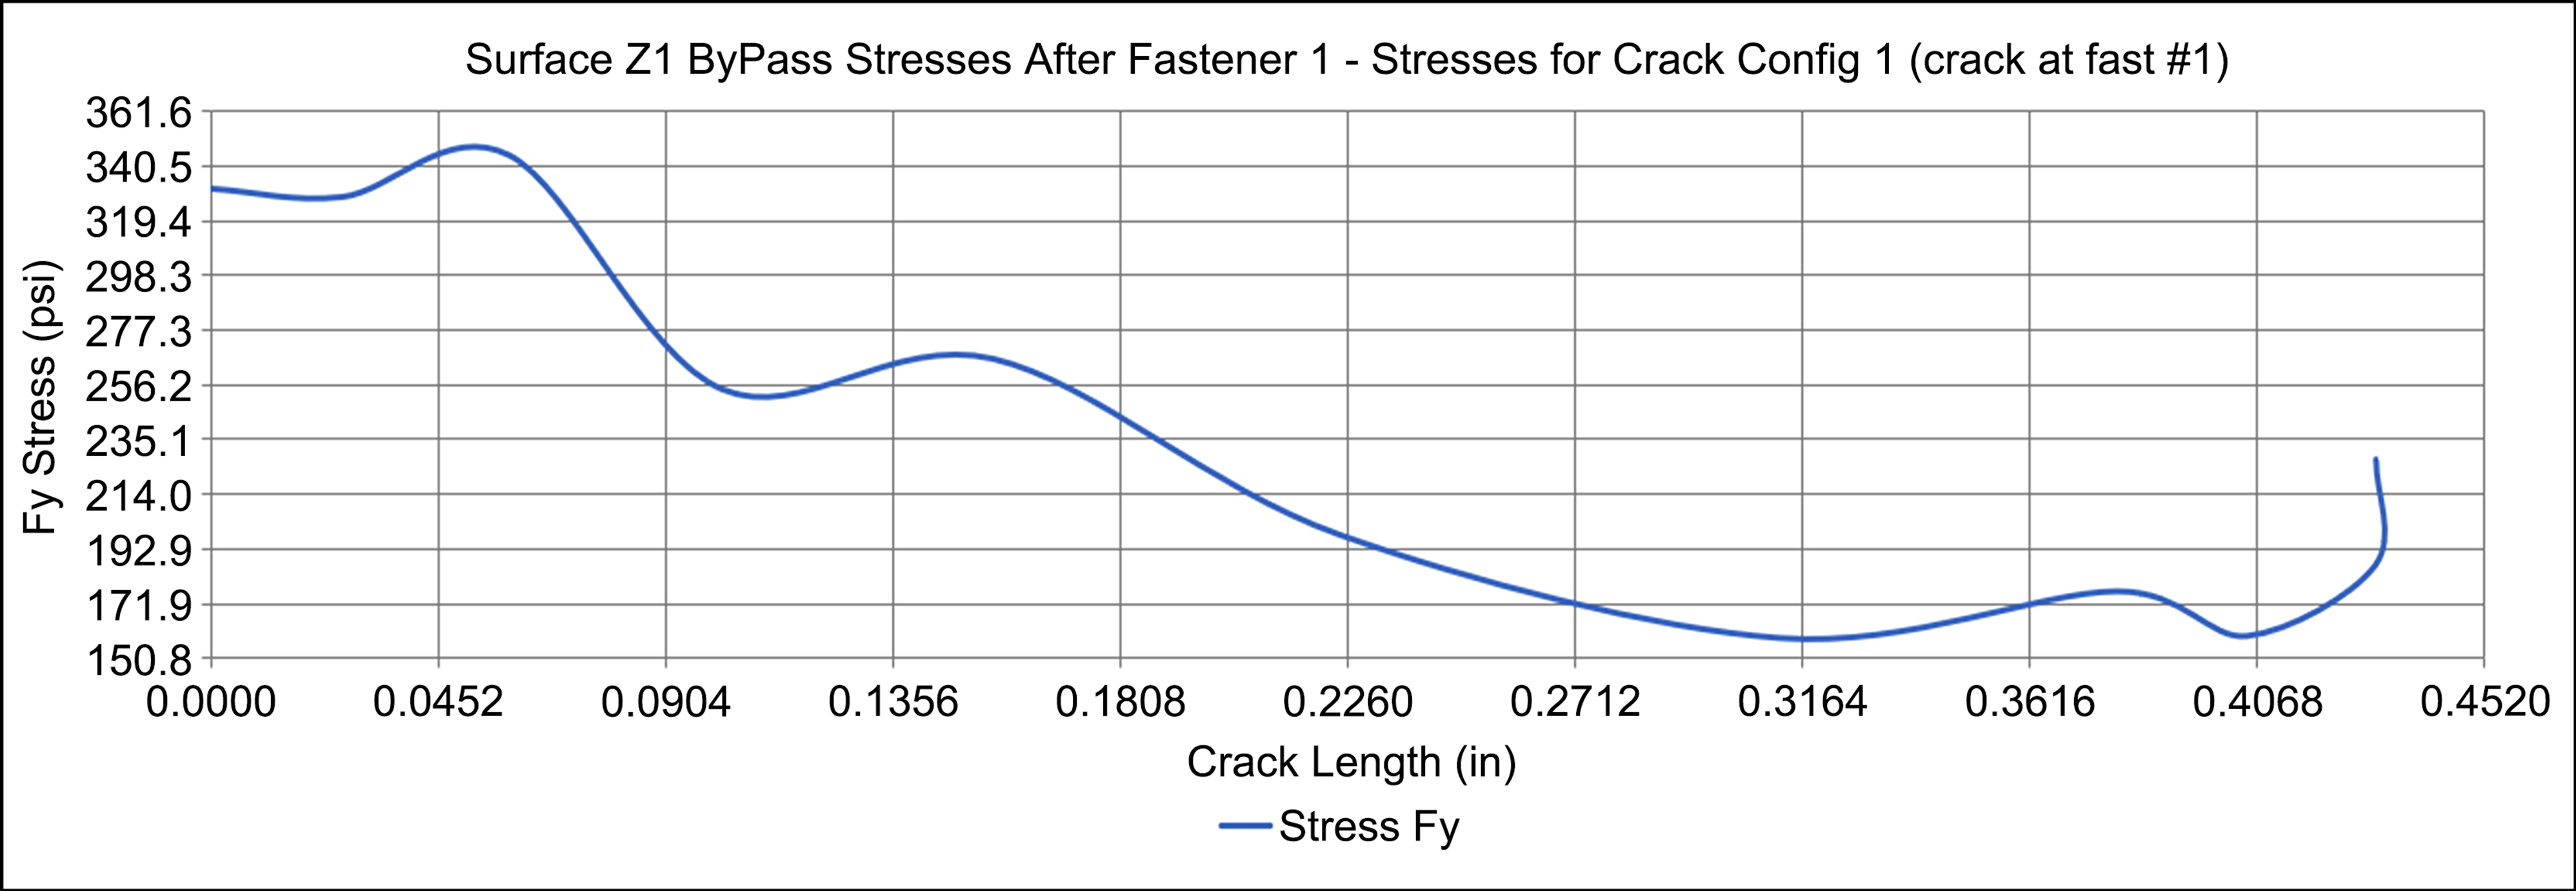 The Effects Of Fatigue Cracks On Fastener Loads During Cyclic Loading And On The Stresses Used For Crack Growth Analysis In Classical Linear Elastic Fracture Mechanics Approaches